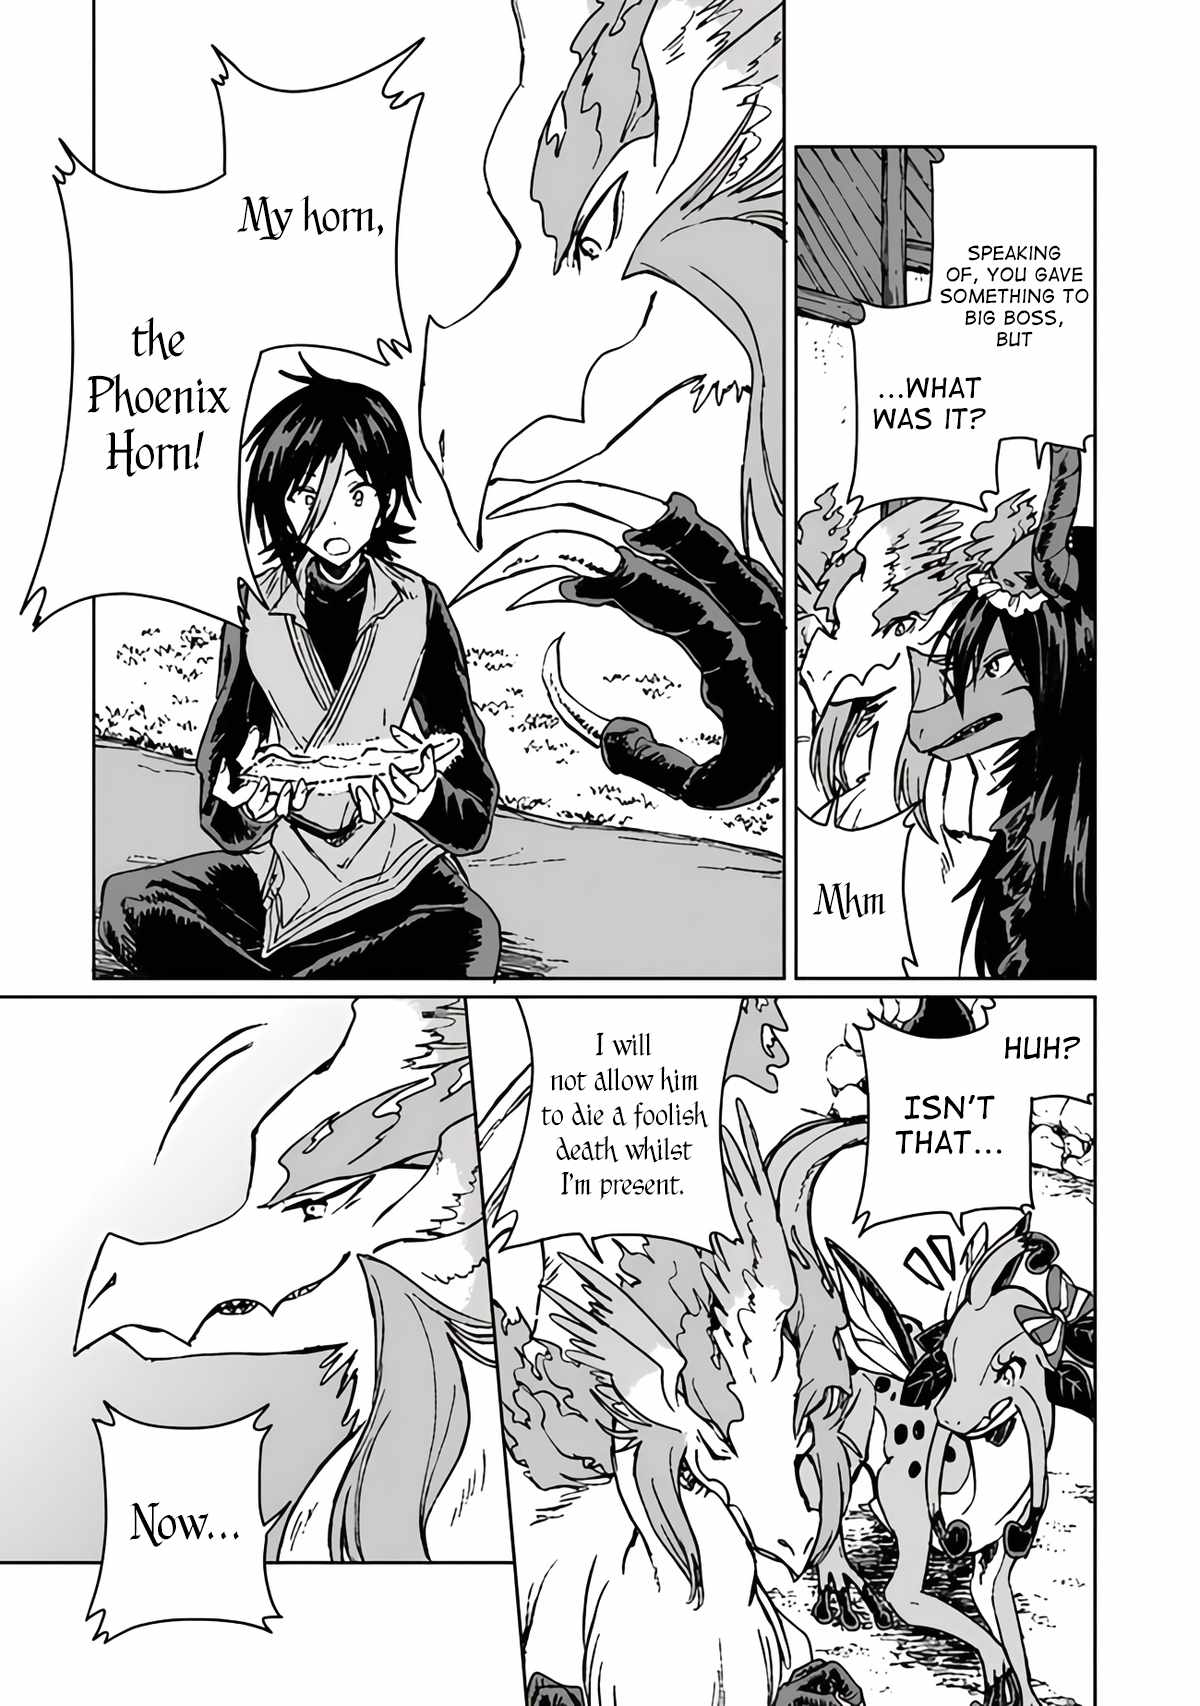 read I've Been Kicked Out of an S-Rank Guild. But Only I Can Communicate With Dragons. Before I Knew It, I Became the Greatest Dragon Knight Chapter 20 Manga Online Free at Mangabuddy, MangaNato,Manhwatop | MangaSo.com